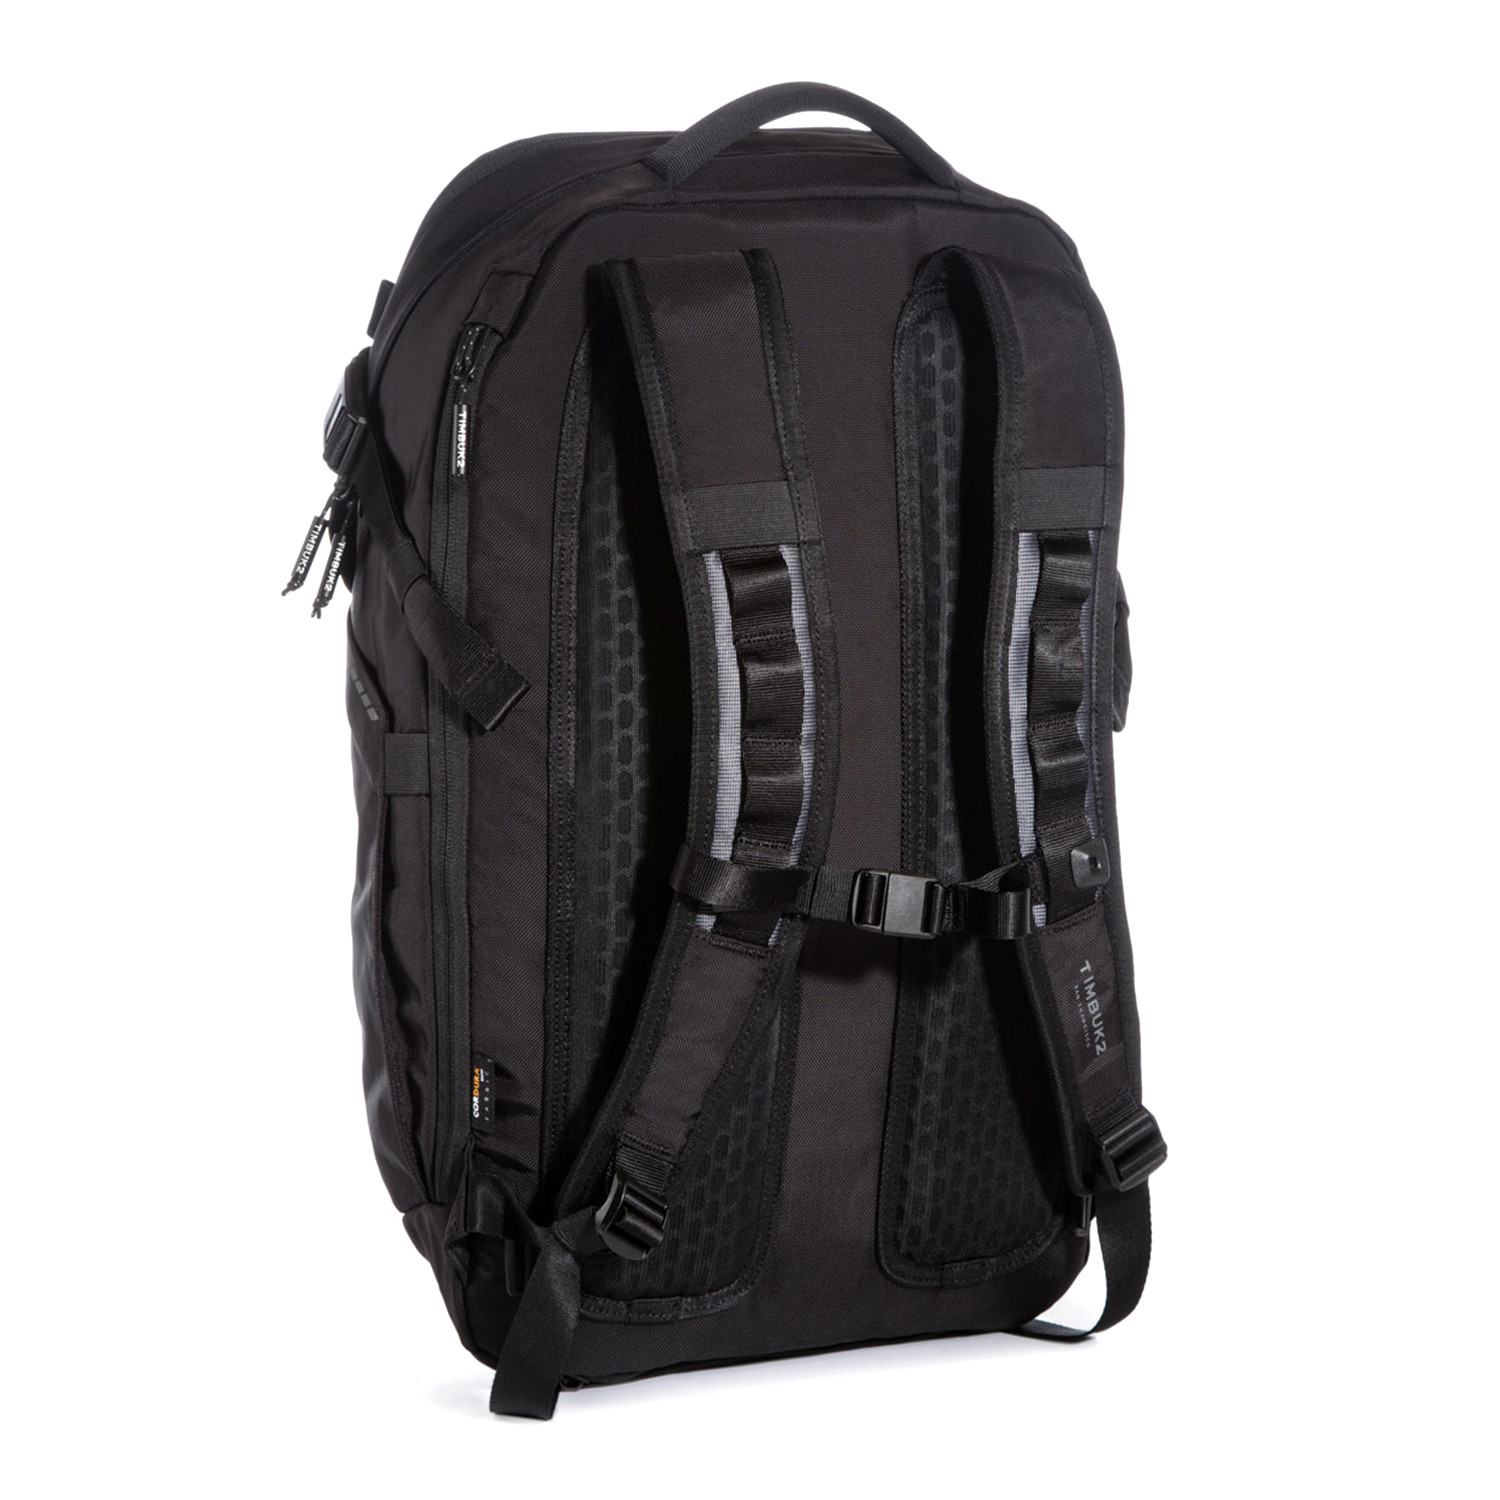 Parker Pack // Jet Black - Timbuk2 - Touch of Modern